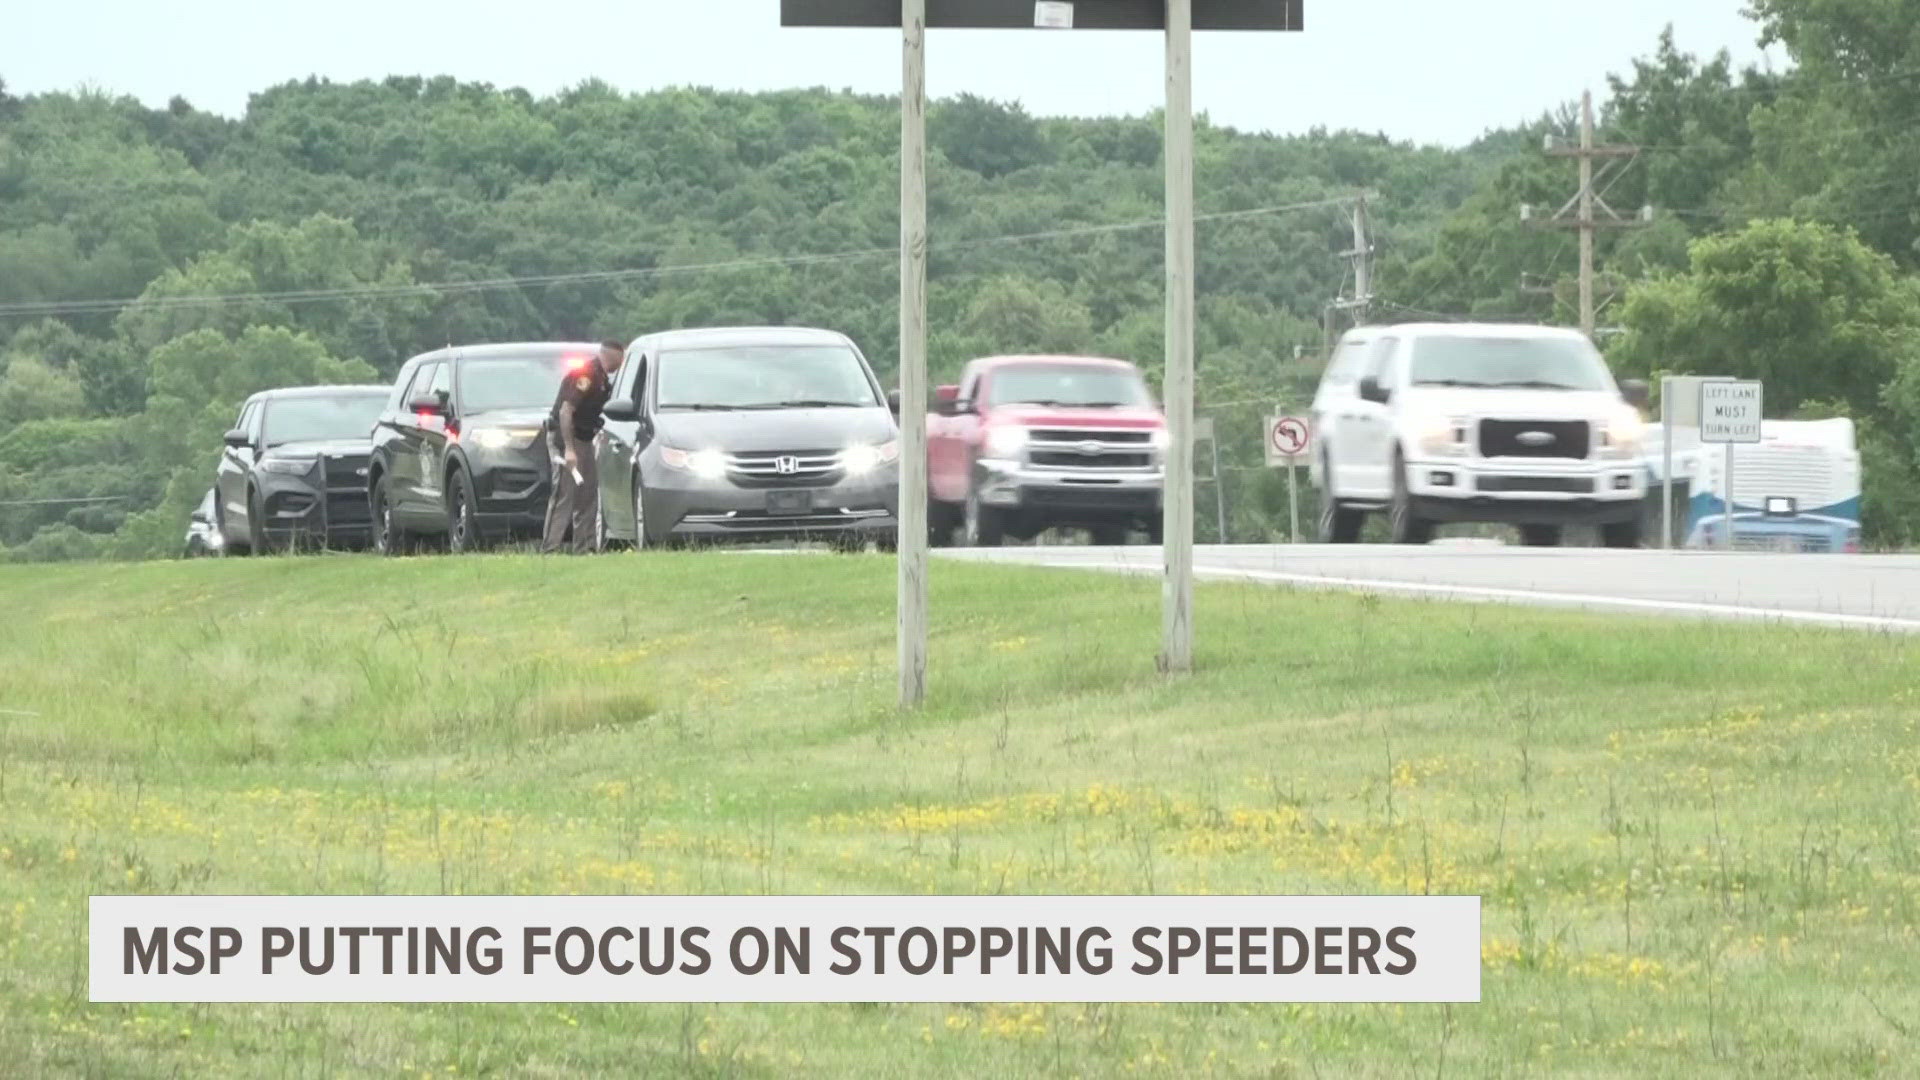 Michigan State Police are planning to focus on stopping speeding drivers.